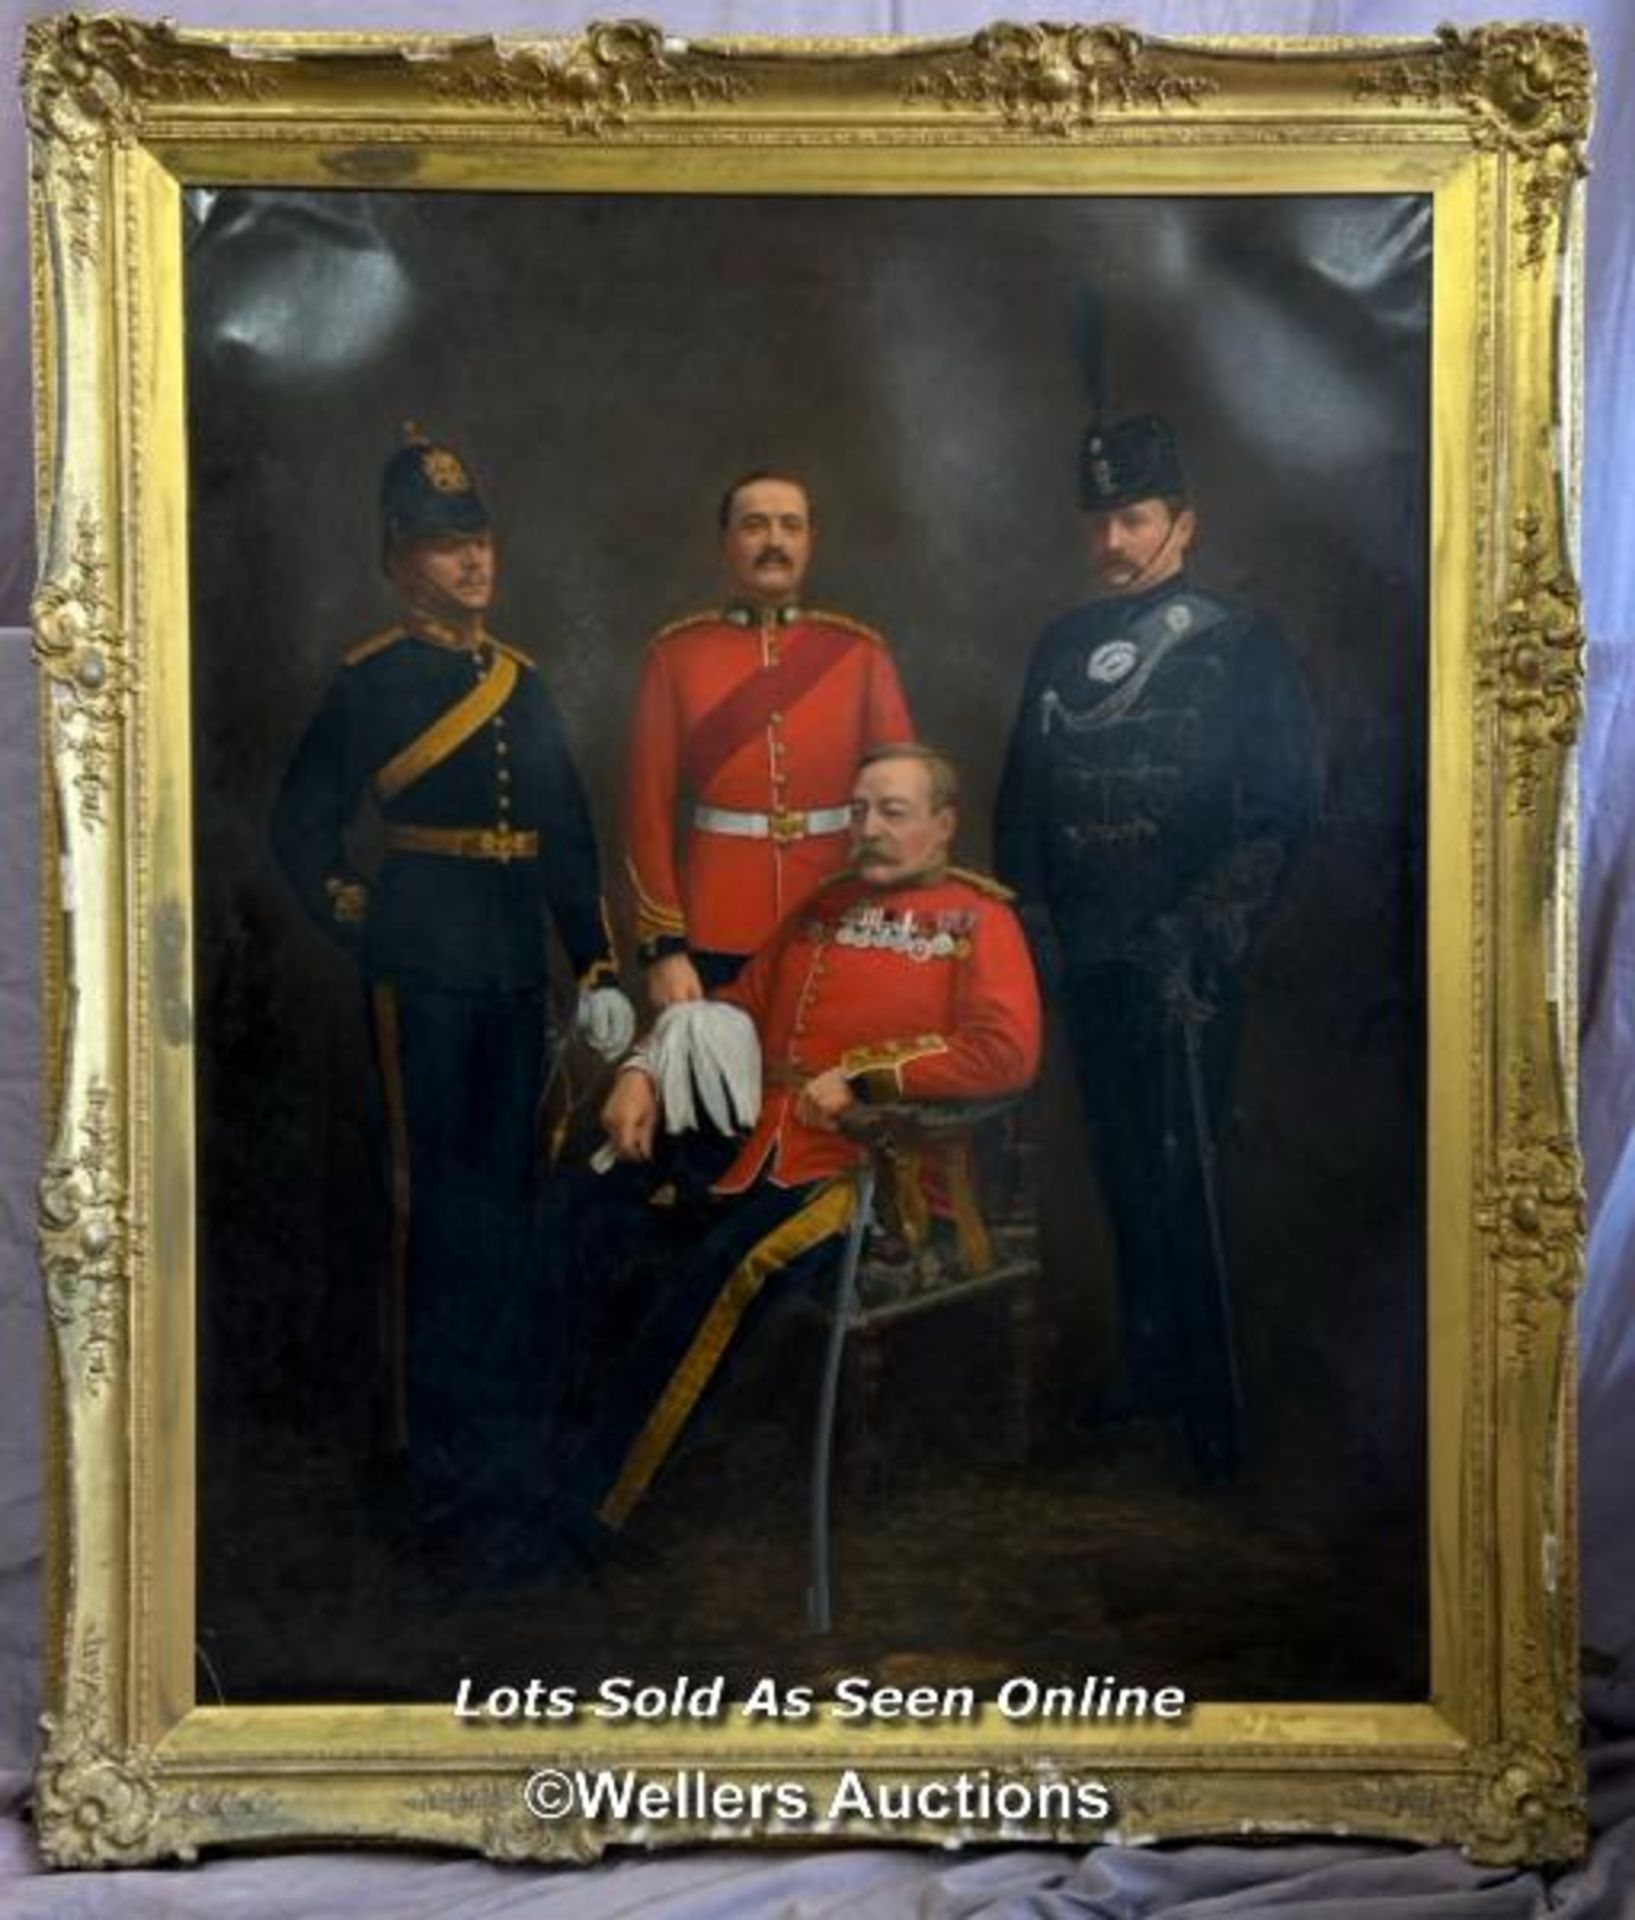 LARGE VICTORIAN OIL ON CANVAS PORTRAIT DEPICTING FOUR MILITARY OFFICERS (APPEARS TO BE FATHER AND